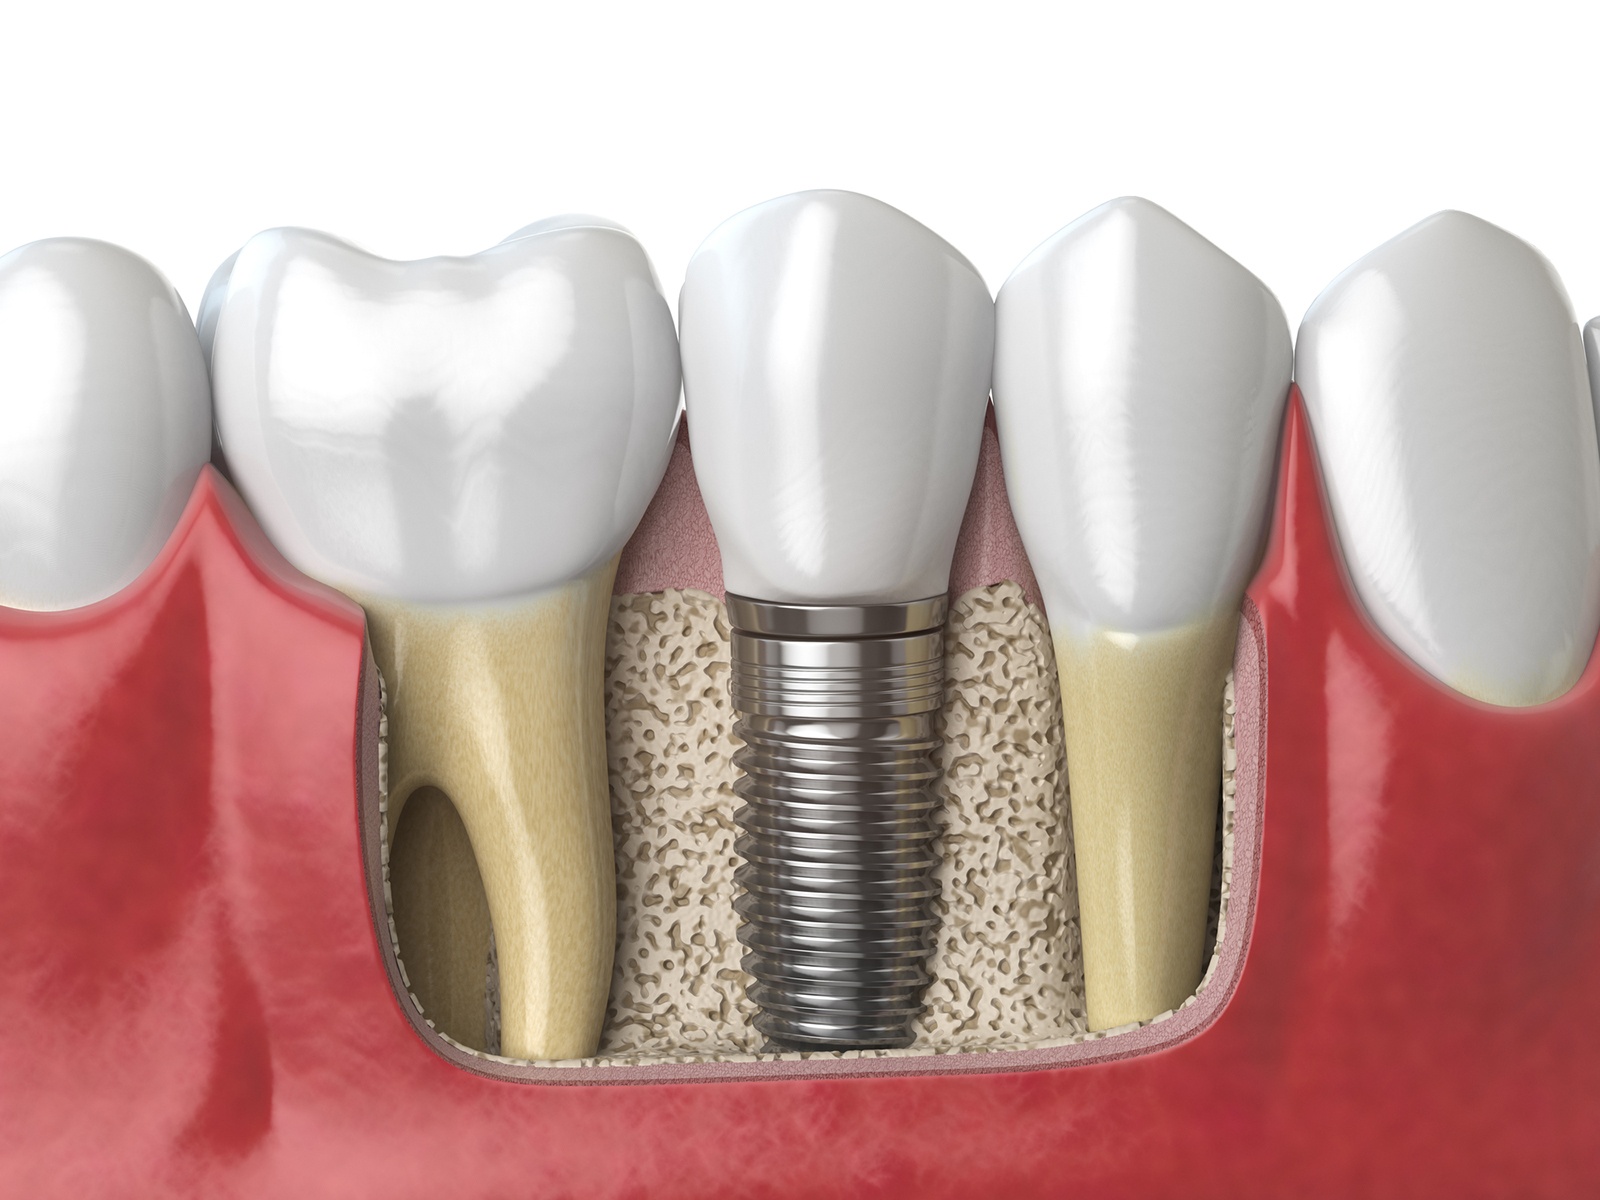 What is the downside of dental implants?